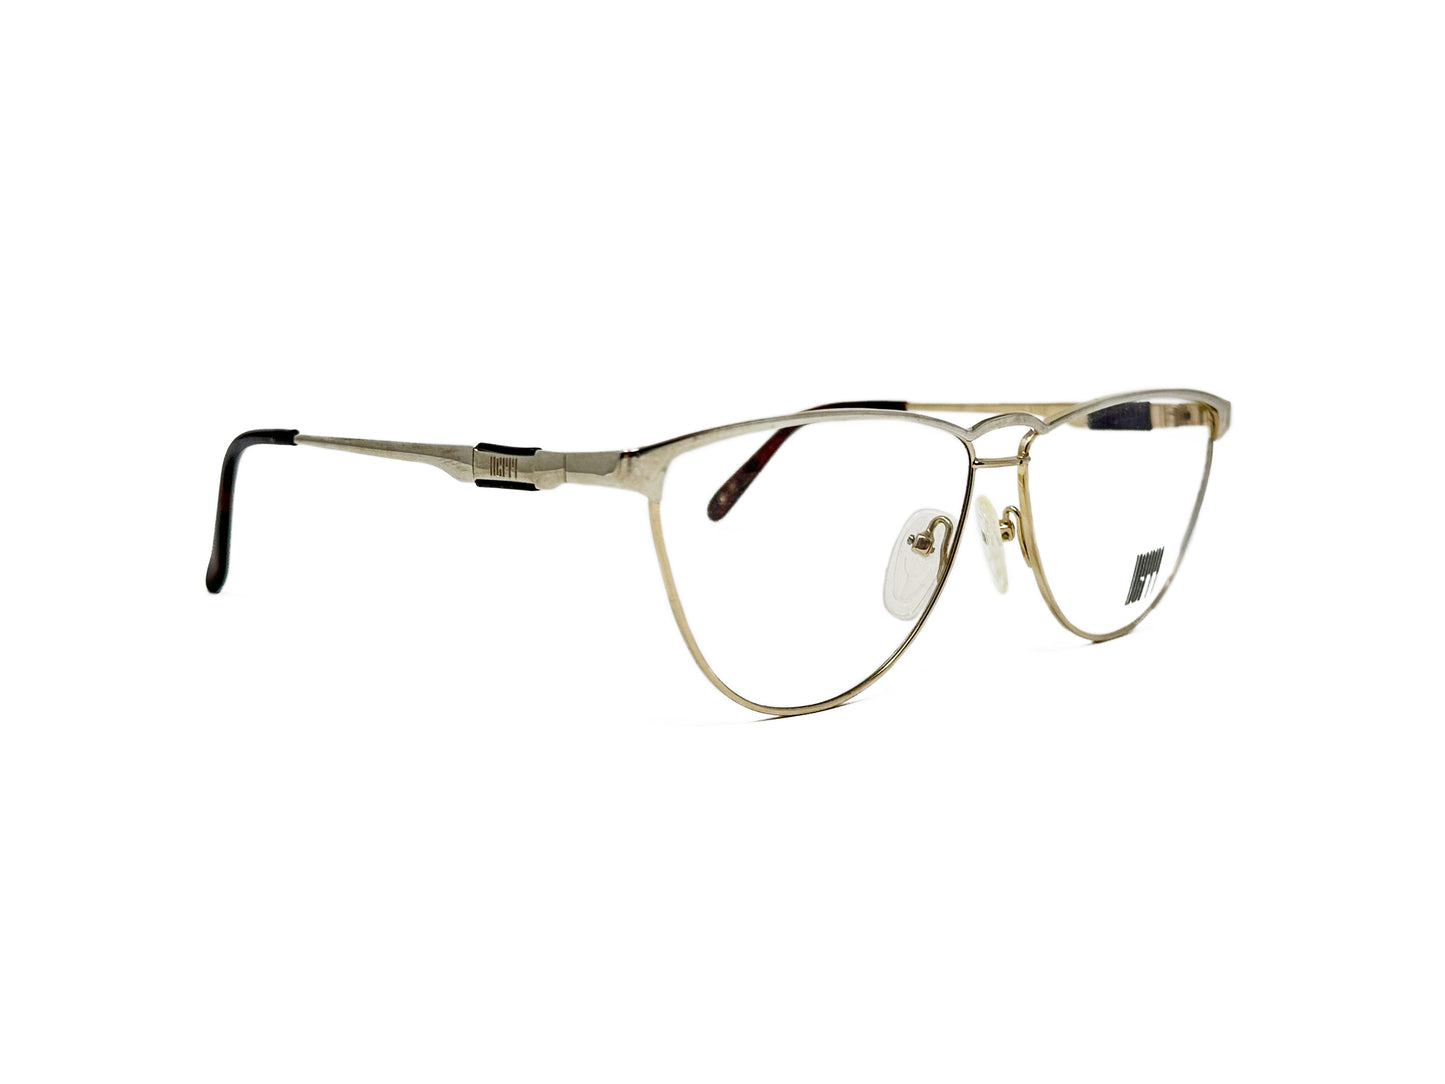 Derri rounded-triangular, metal, optical frame. Model: 9702. Color: G-W - White gold. Side view.